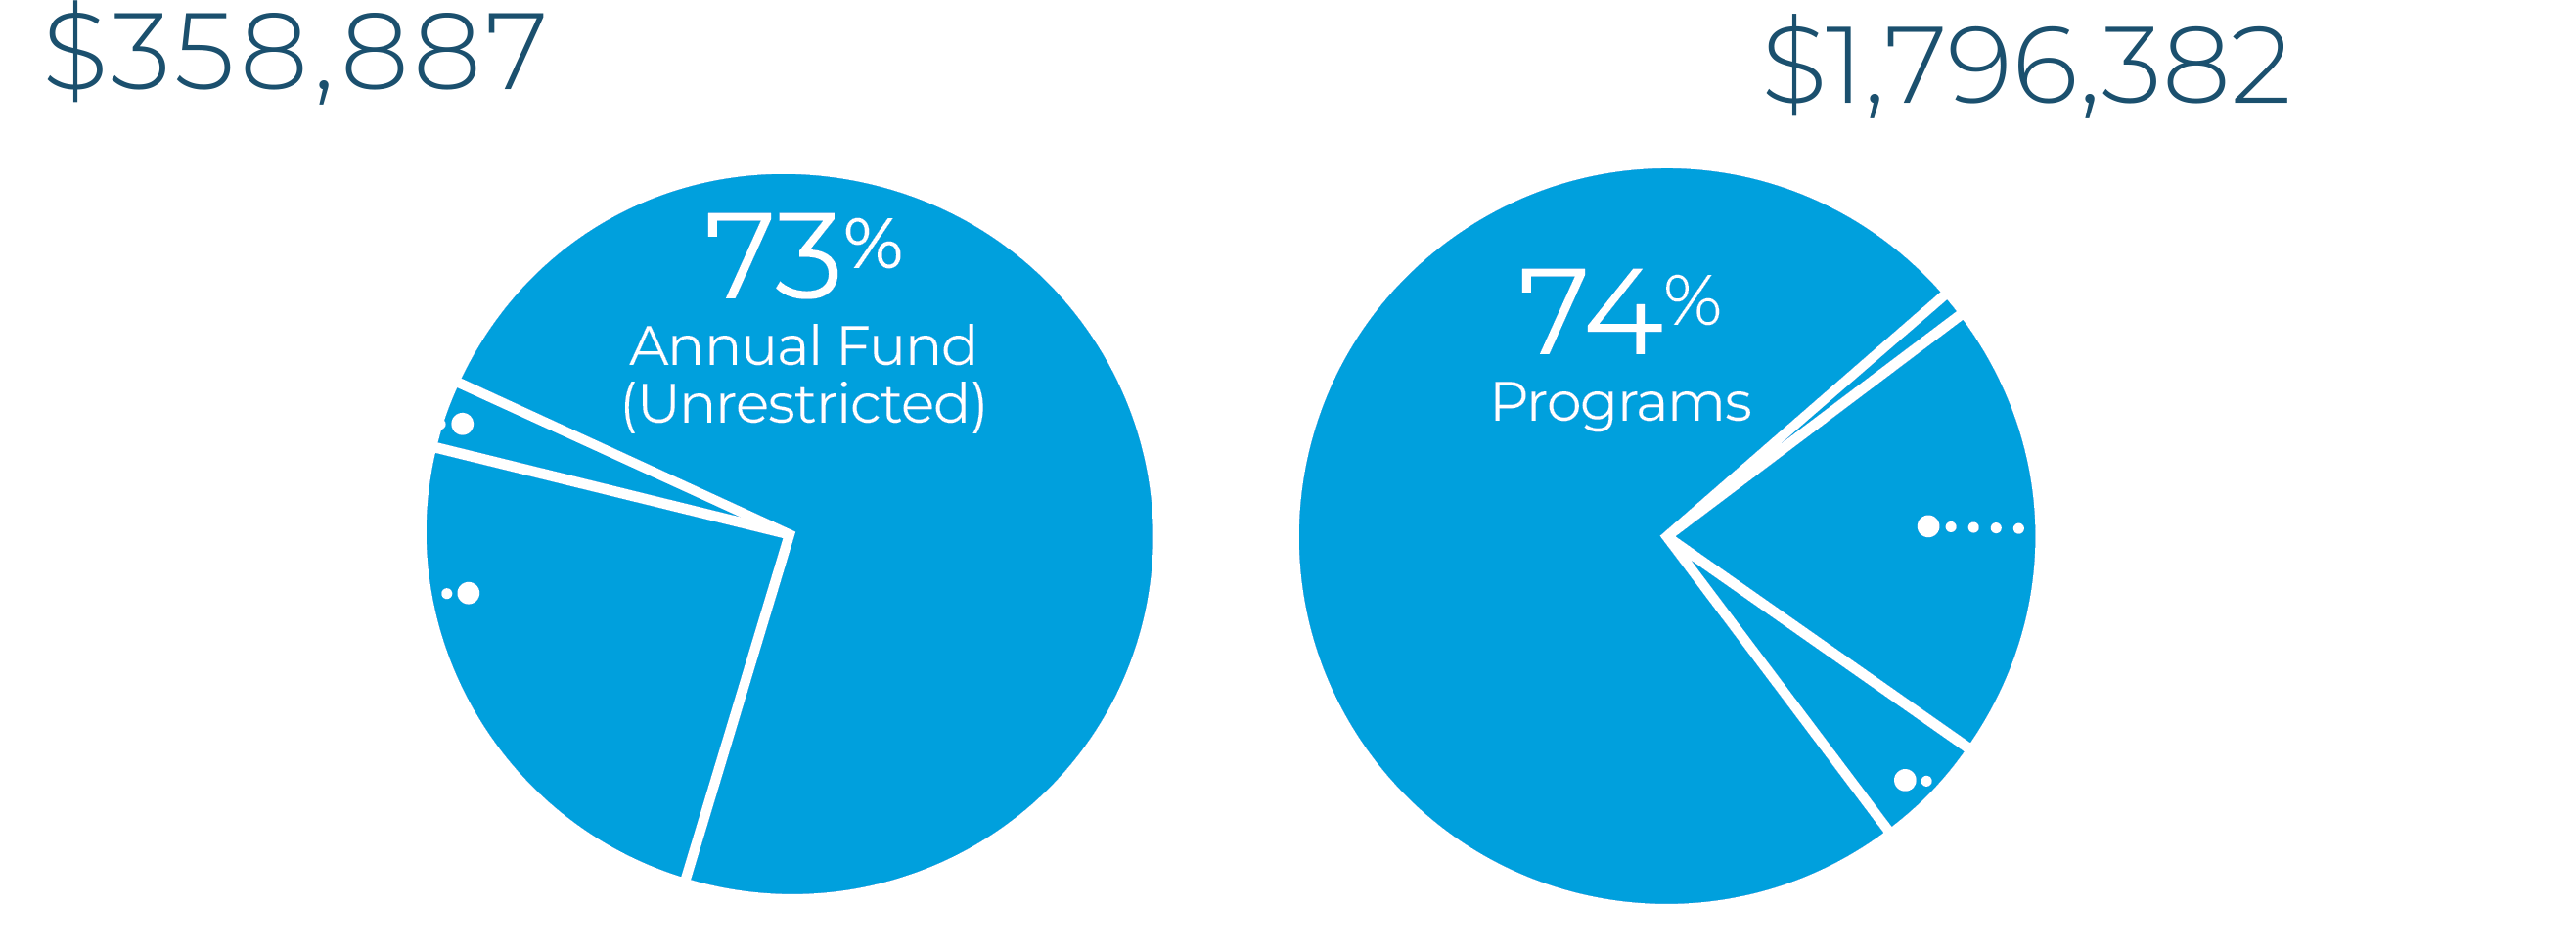 Two Pie Charts. The first is for "Annual Giving - $358,887", showing: 73% Annual Fund (Unrestricted), 24% Disciples Mission Fund (Unrestricted), and 3% Annual Restricted. The second pie chart is for "Total Giving - $1,796,382", showing: 74% Programs, 20% Unrestricted, 5% Endowment, and 1% Annual Restricted.